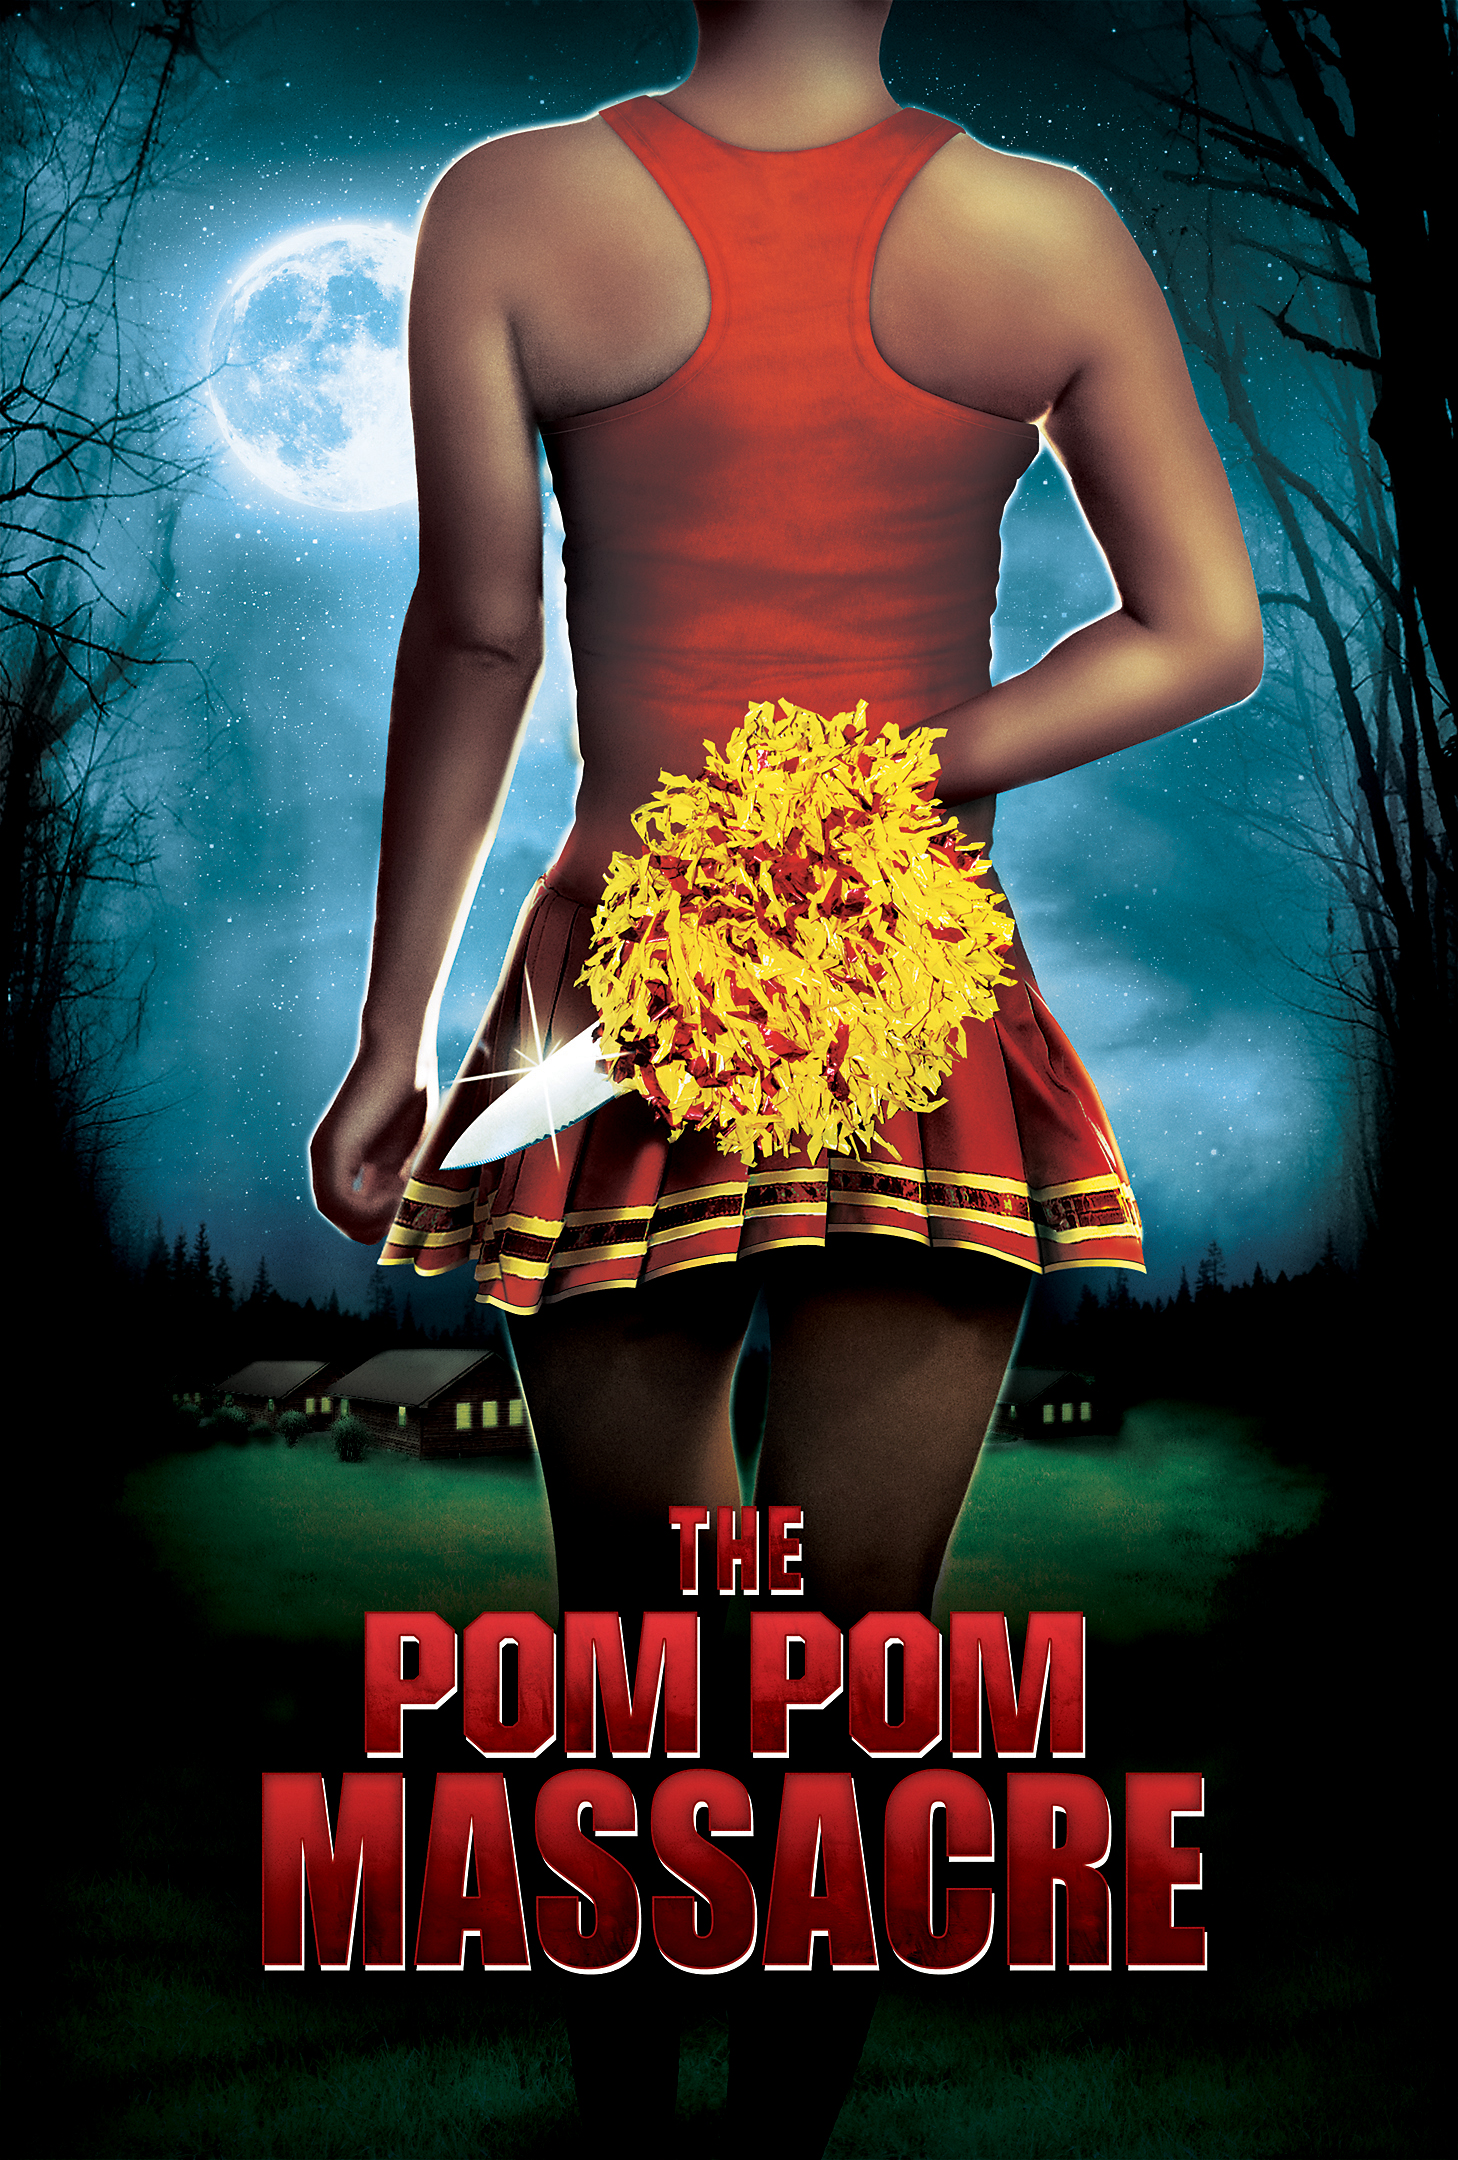 The Pom Pom Massacre, the Cheerleaders must Die is like Friday the 13th at Cheerleading...